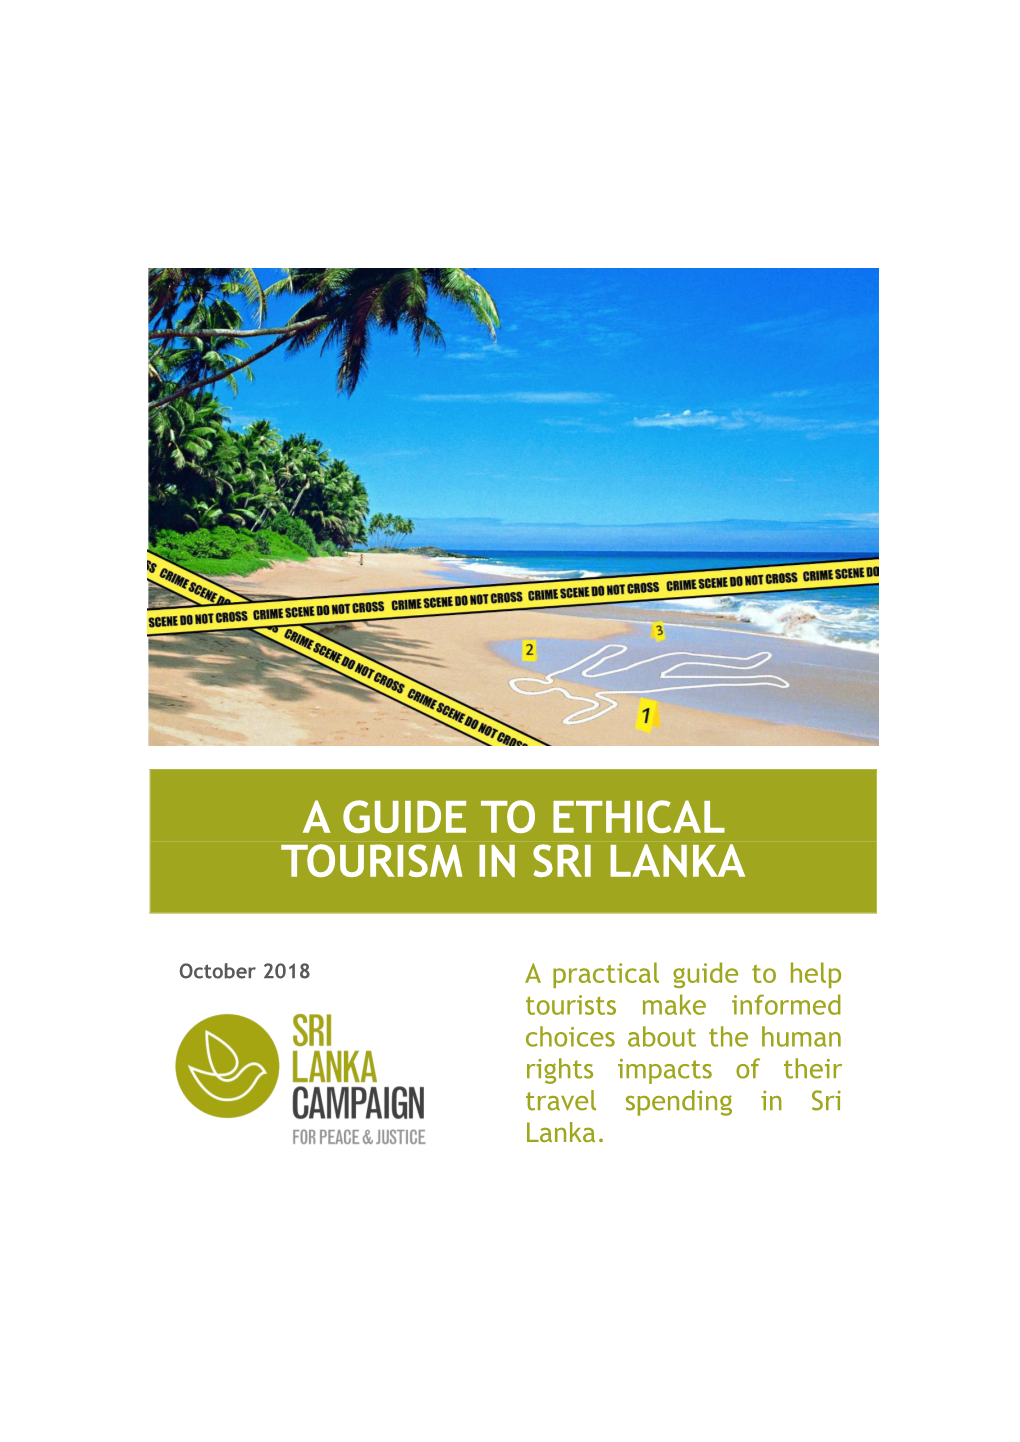 A Guide to Ethical Tourism in Sri Lanka